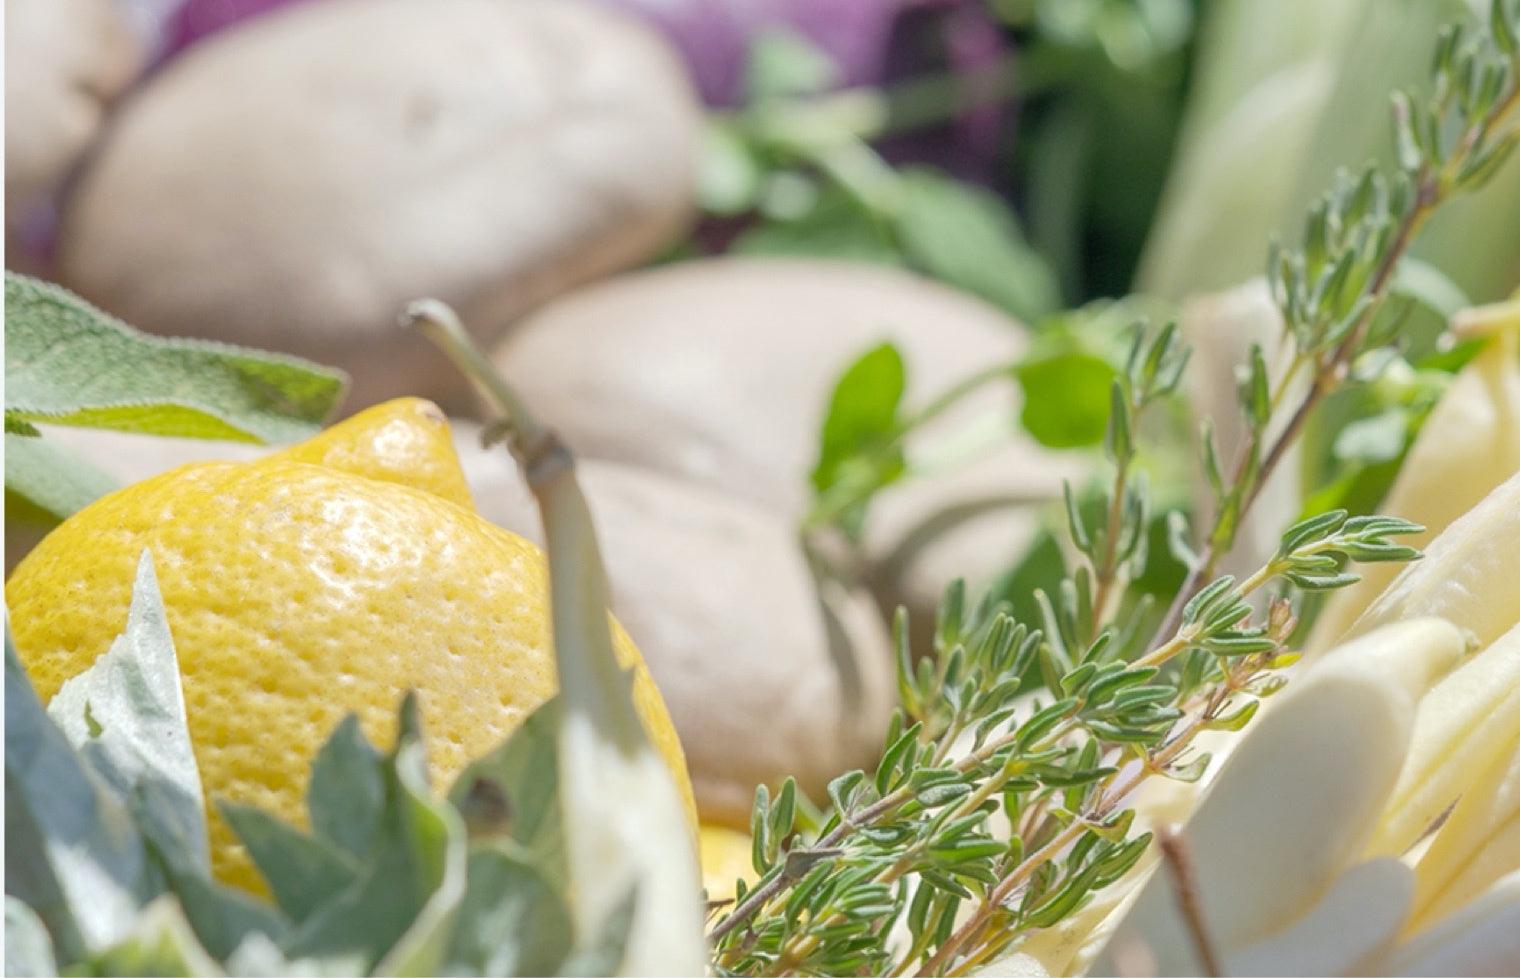 A selection of plant based ingredients - Lemons, potatoes, rosemary 